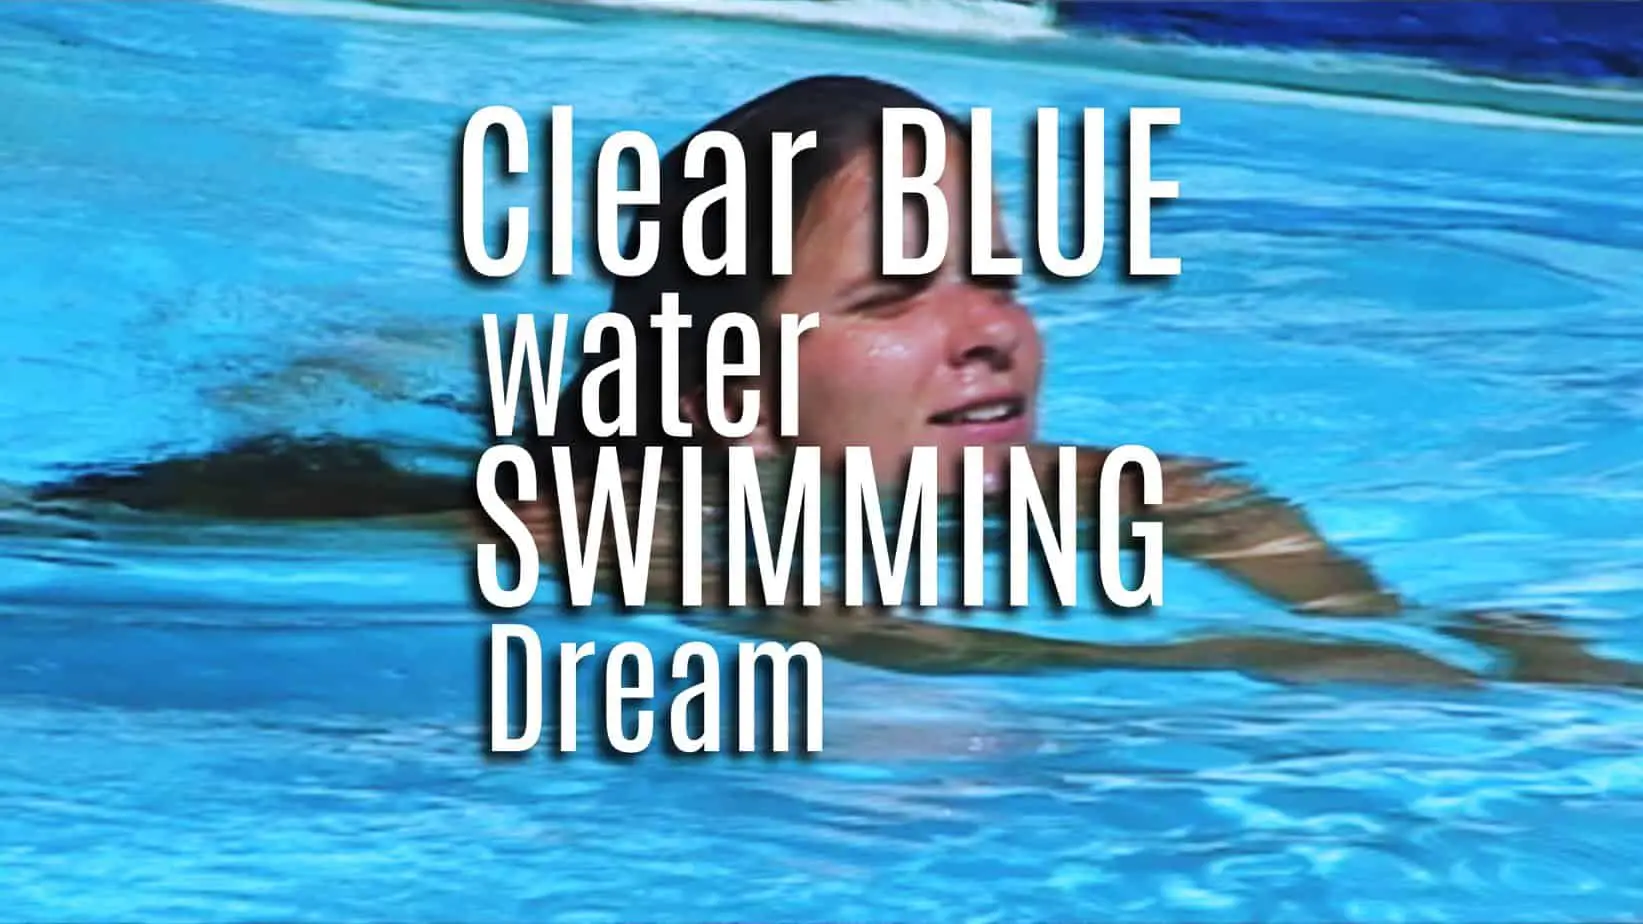 How To Interpret Dreams Of Swimming In Clear Blue Water